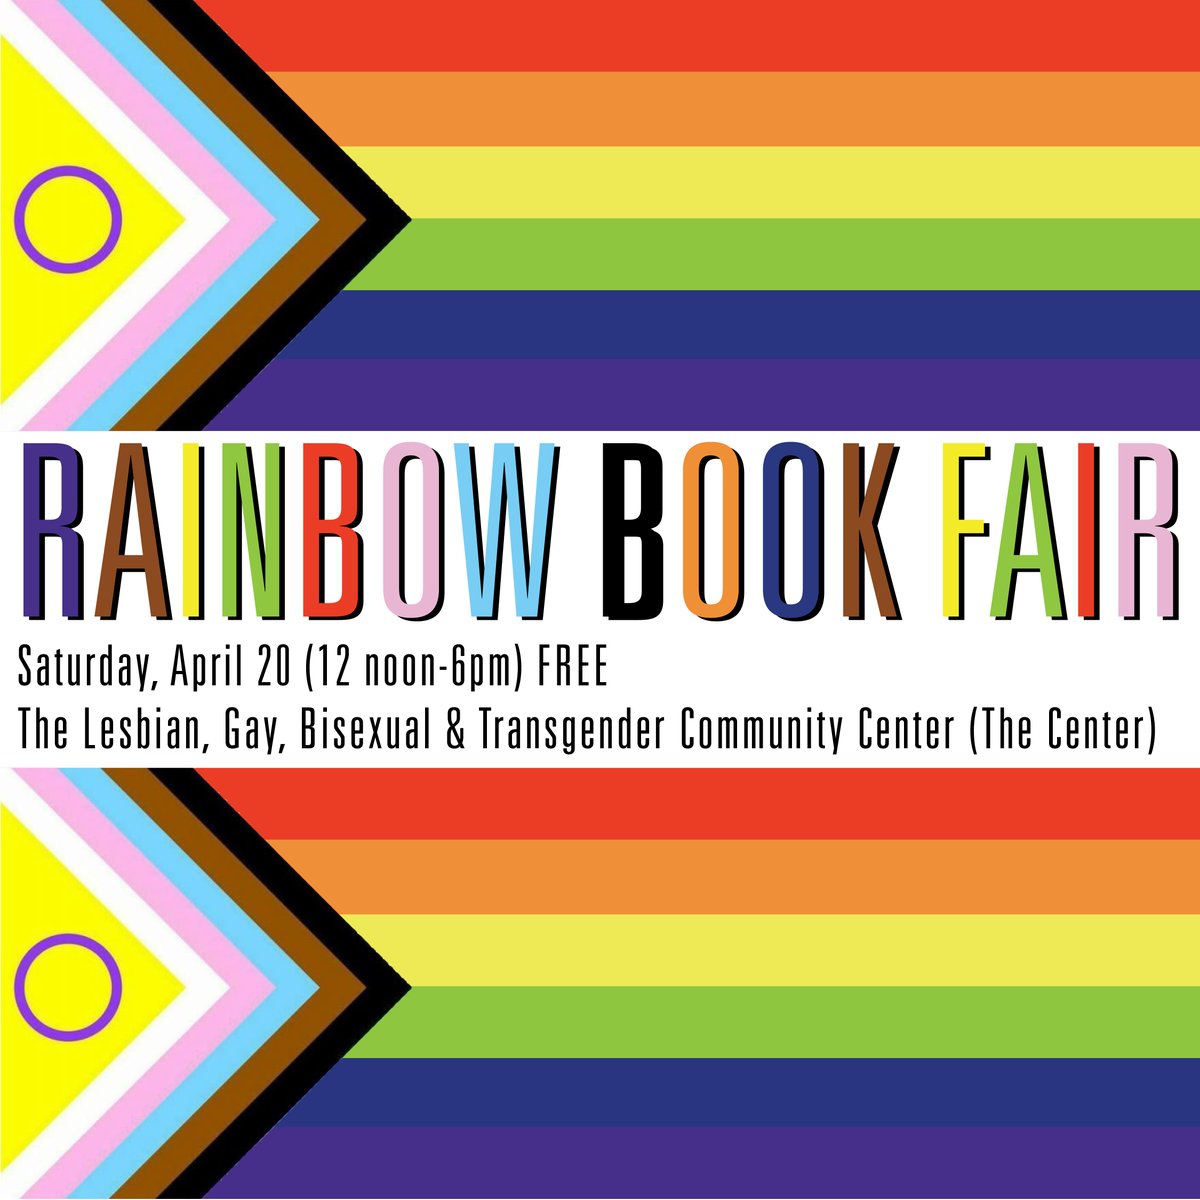 Join us at the Rainbow Book Fair 30% discount and free shipping (RUSA30) rutgersuniversitypress.org/search-results… Saturday, April 20 (12 noon to 6 PM) FREE The Lesbian, Gay, Bisexual & Transgender Community Center (The Center) 208 W 13 Street New York, NY 10011 #Pride #LGBTQ